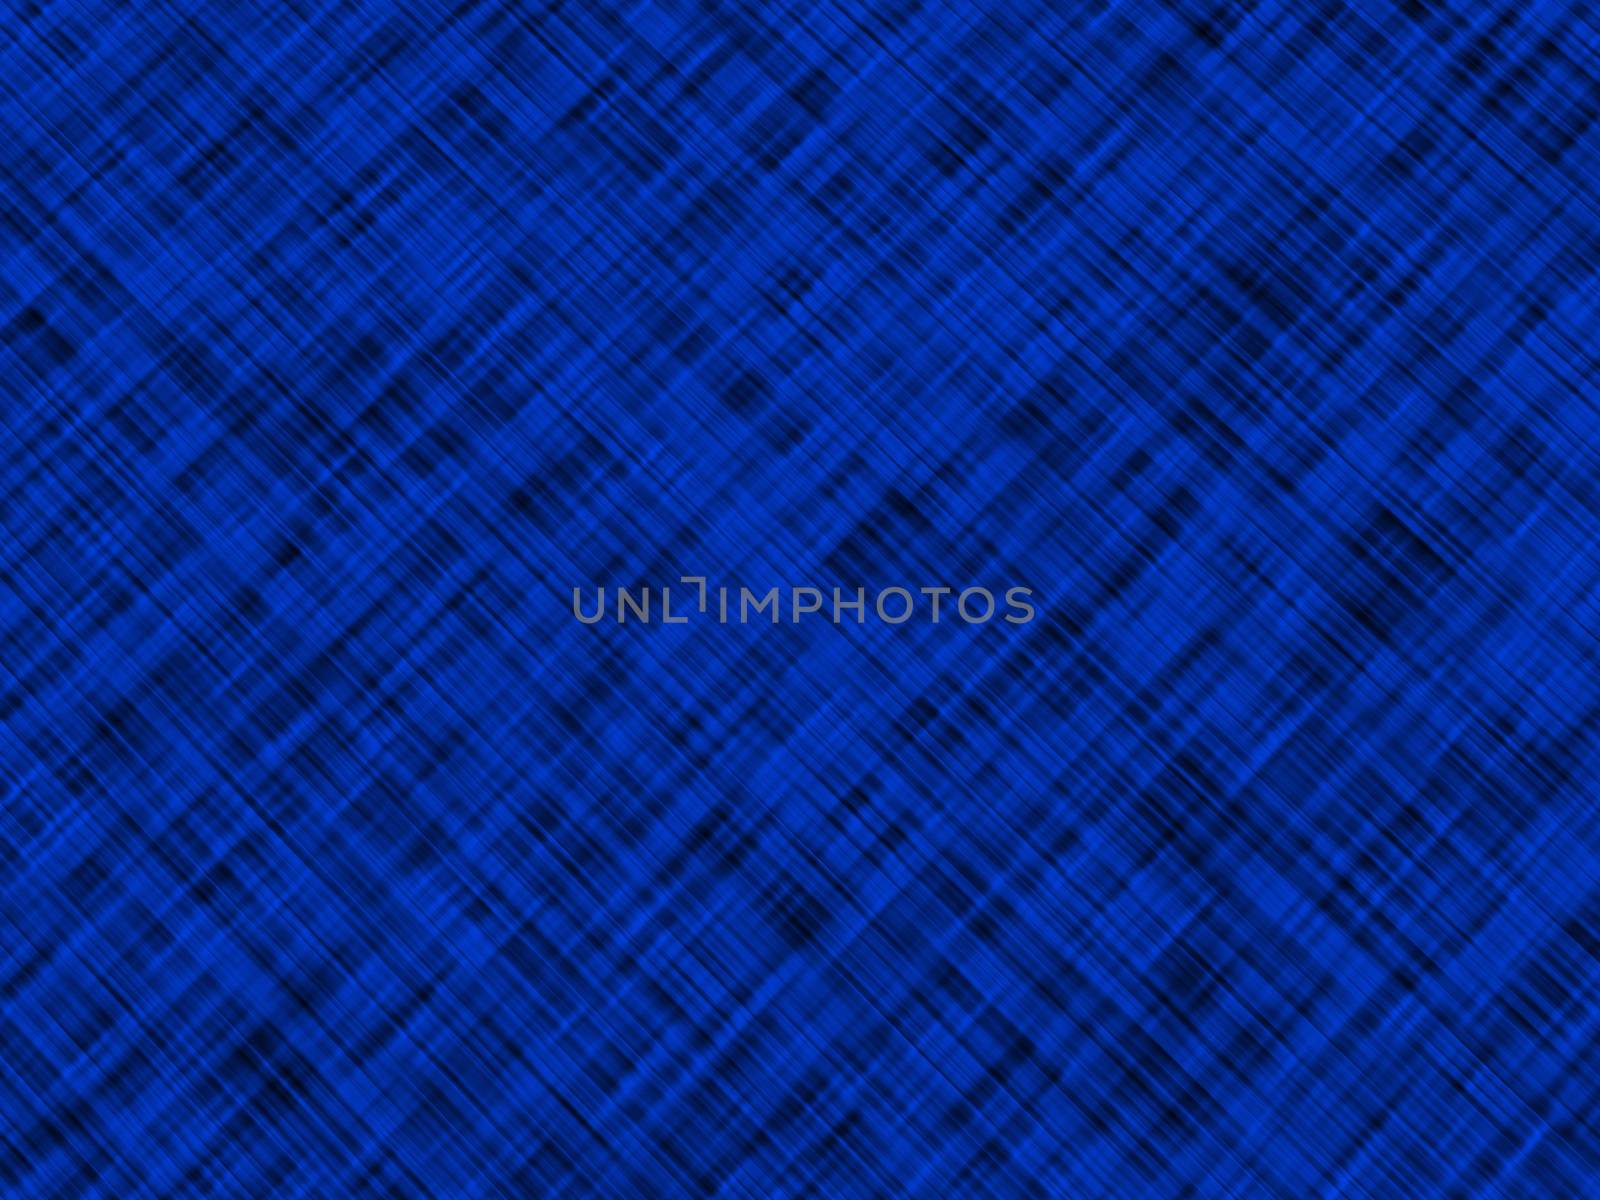 Dark Blue Fabric Striped Texture - Abstract Background, Generated Image